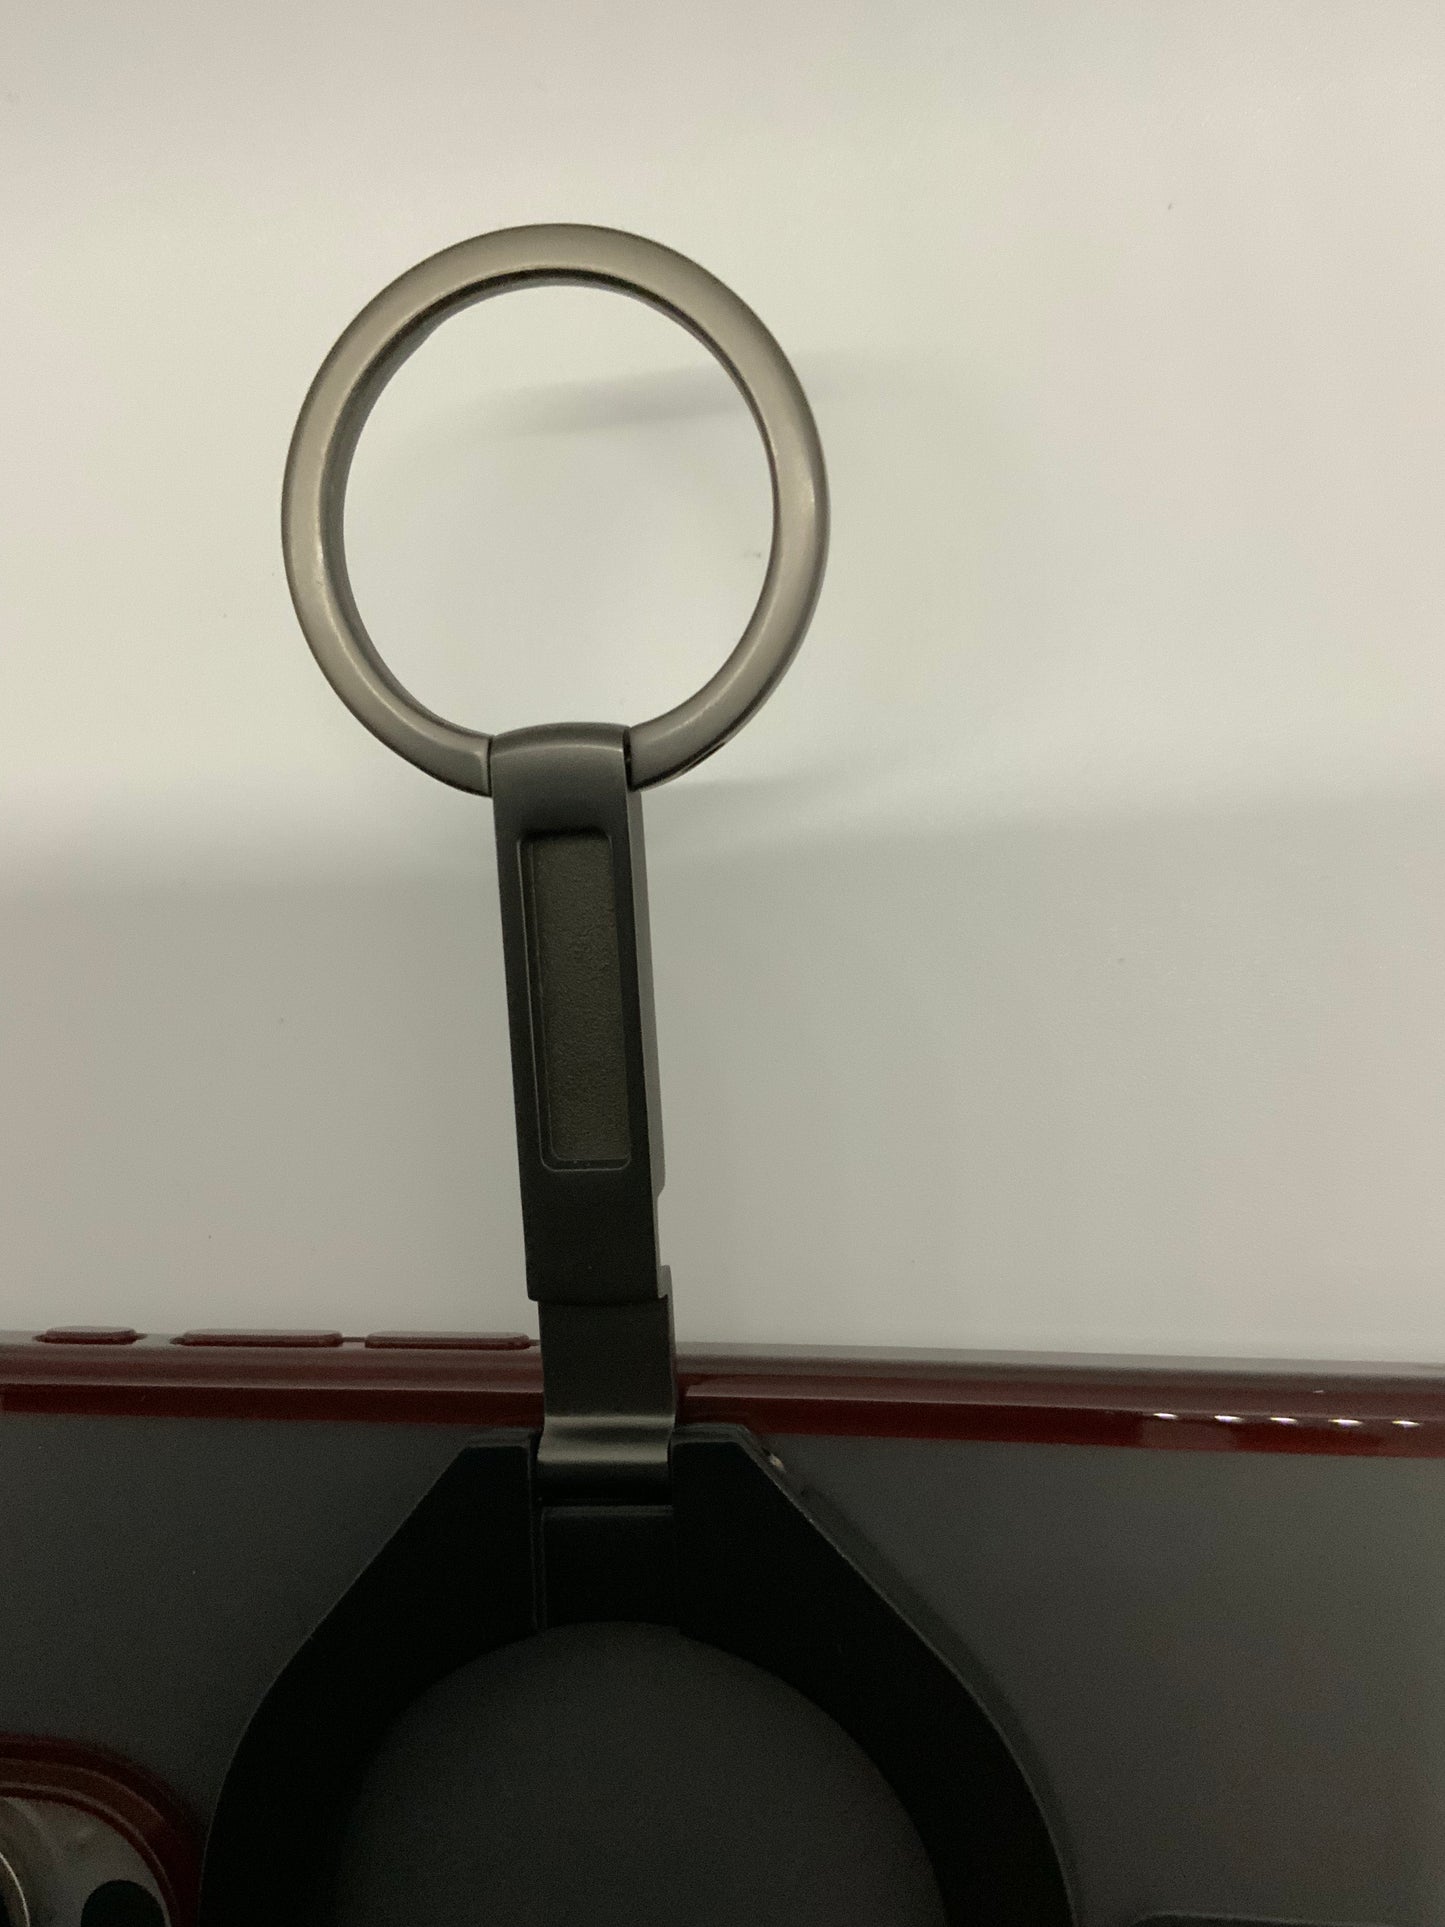 Be My AI: The picture shows a close-up of an object that appears to be a handle or grip. The handle is circular and is attached to a vertical bar. The circular handle is grey in color and has a smooth finish. The vertical bar is also grey and has a rectangular shape with rounded edges. The bar is attached to a larger object at the bottom of the picture, which is not fully visible. The larger object seems to be dark grey or black with a red horizontal stripe. The background is plain and white.